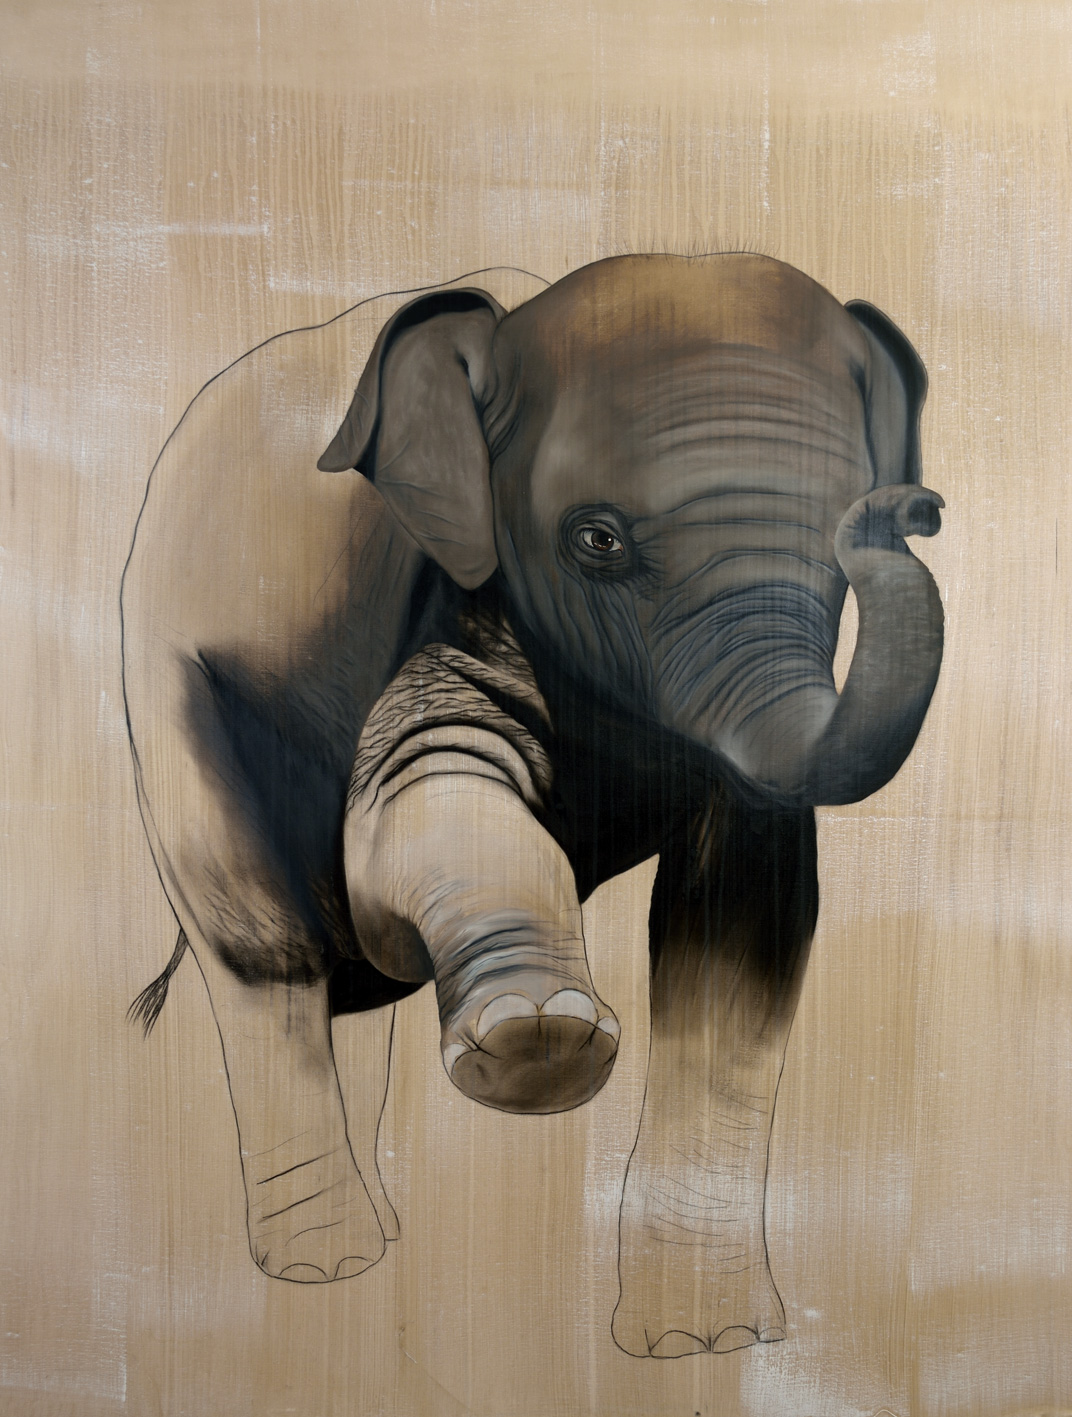 ELEPHAS-MAXIMUS elephant-asiatic-indian-baby-elephas-maximus-delete-threatened-endangered-extinction
 Thierry Bisch Contemporary painter animals painting art decoration nature biodiversity conservation